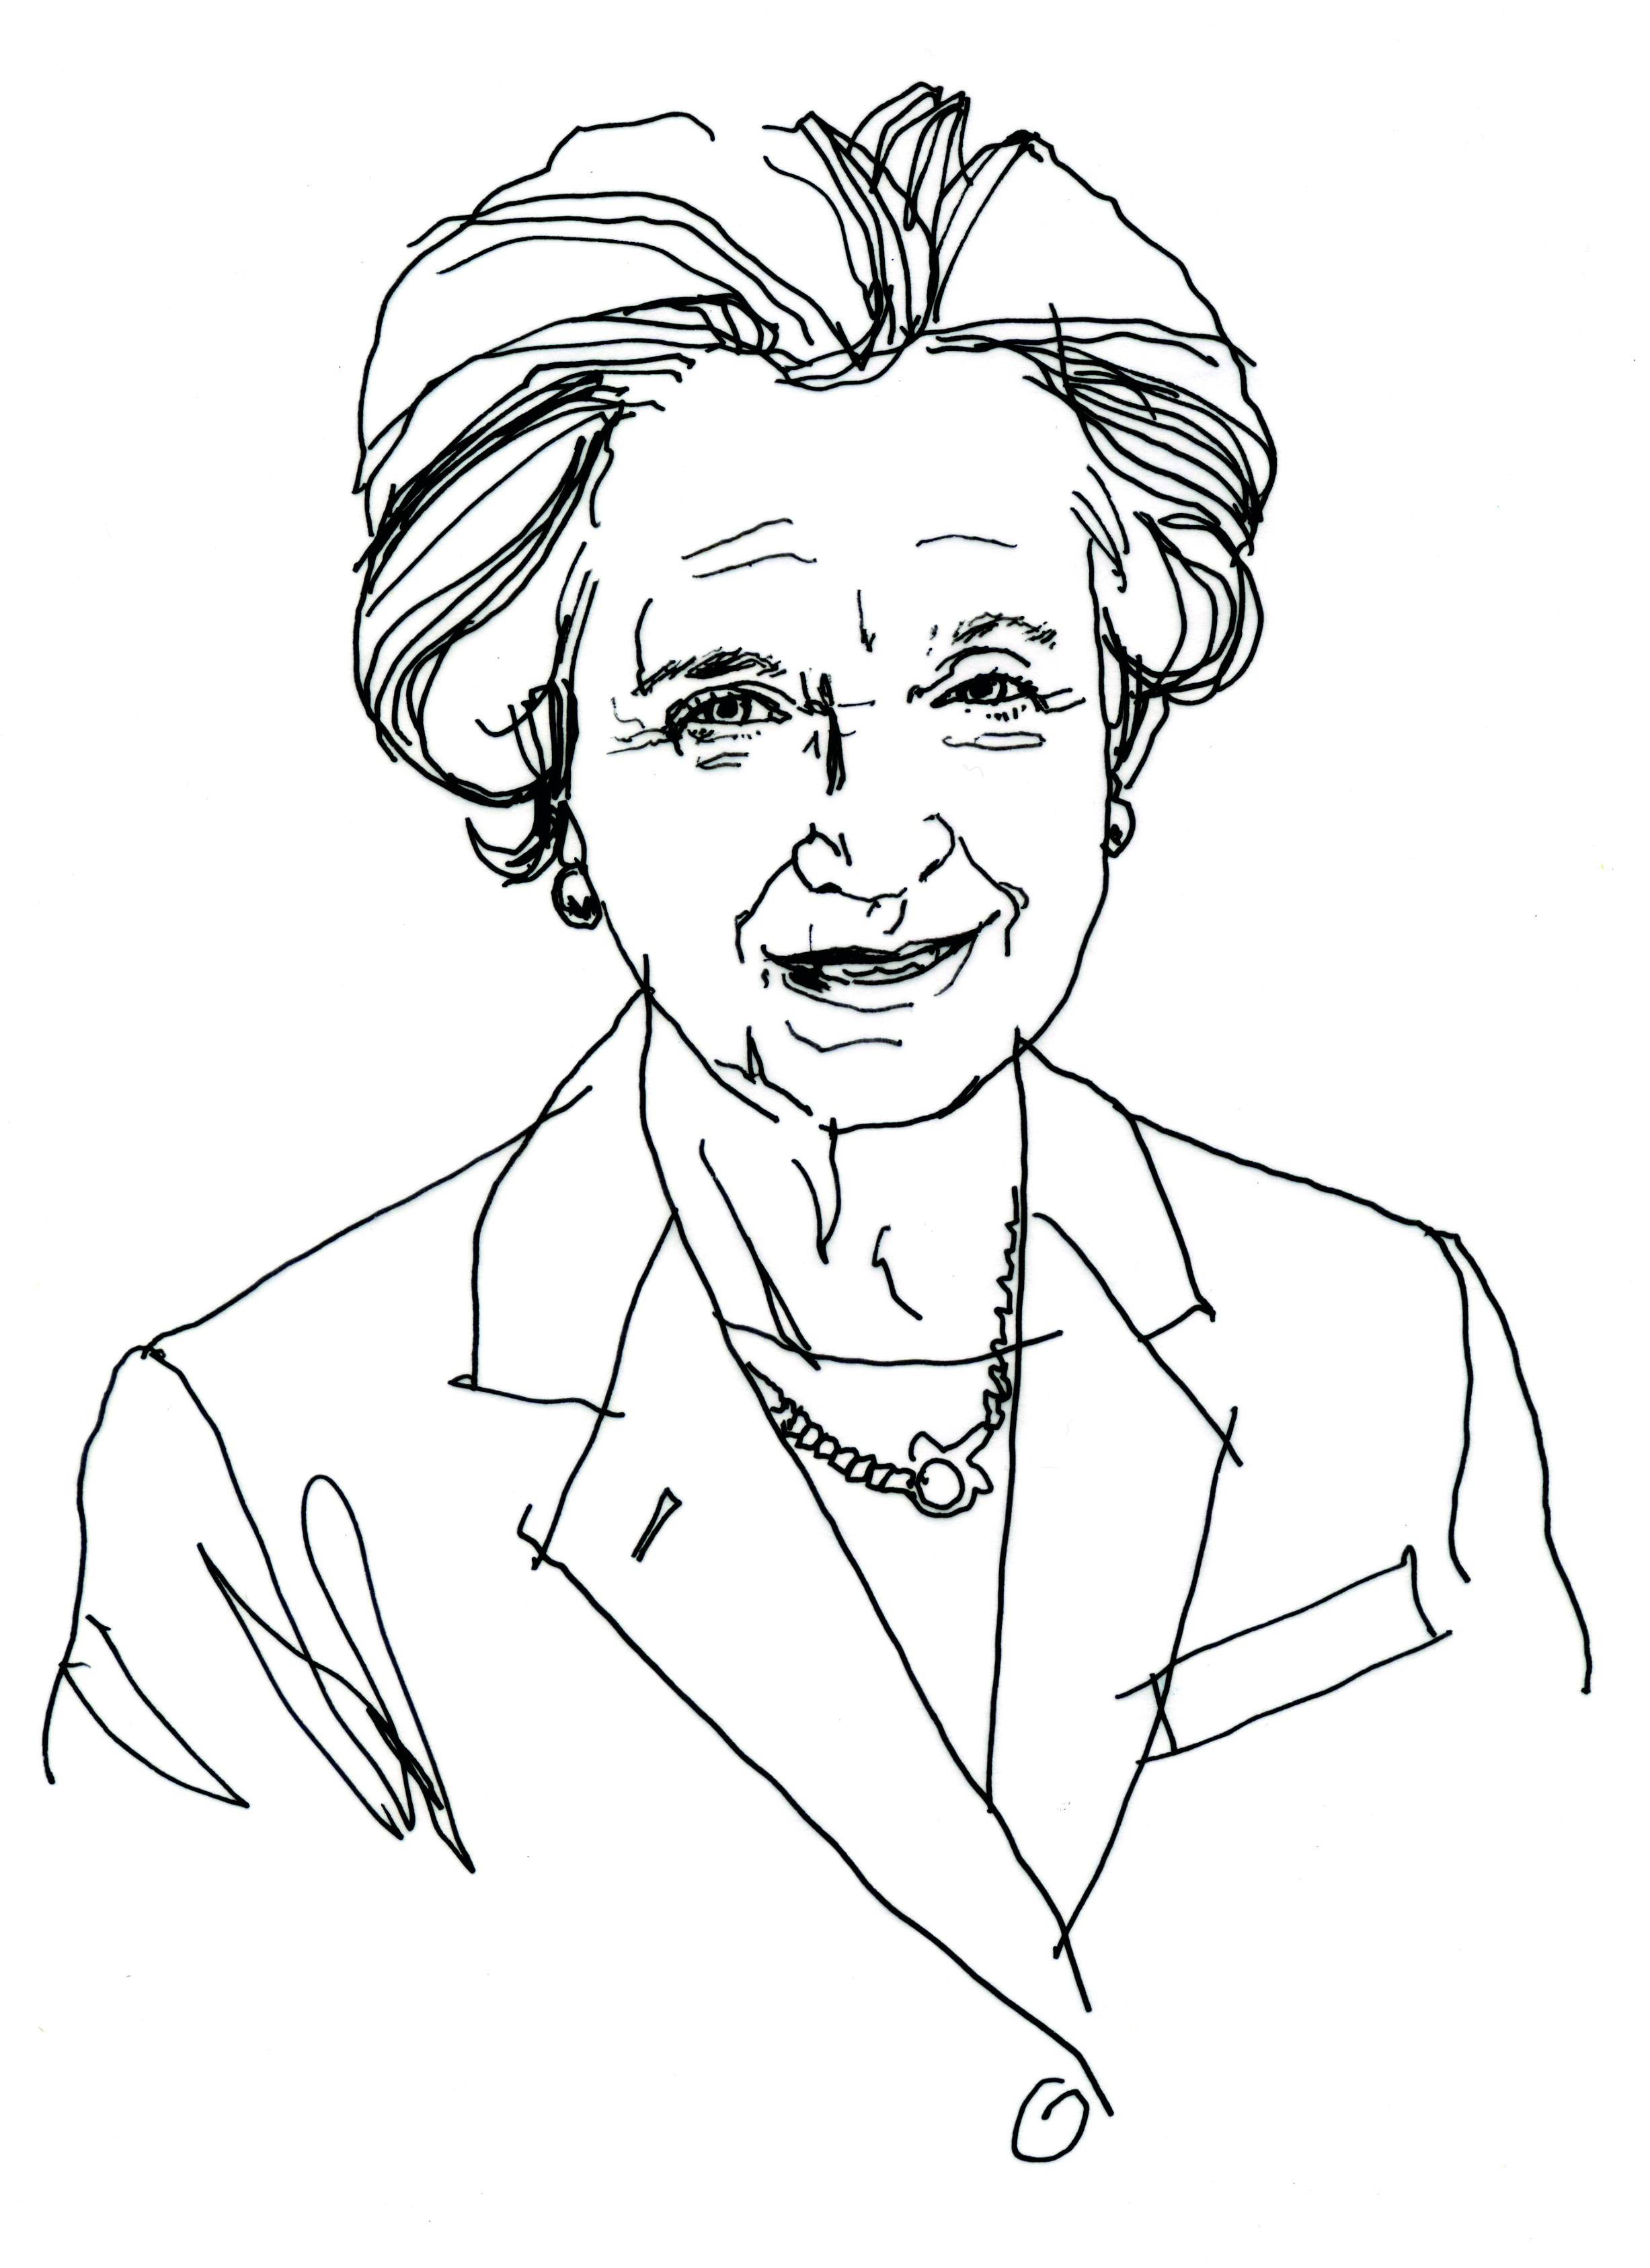 Illustration in black ink of elderly white woman with coiffed hair and blazer, Dr. Kathleen Foley (M.D. ’69).